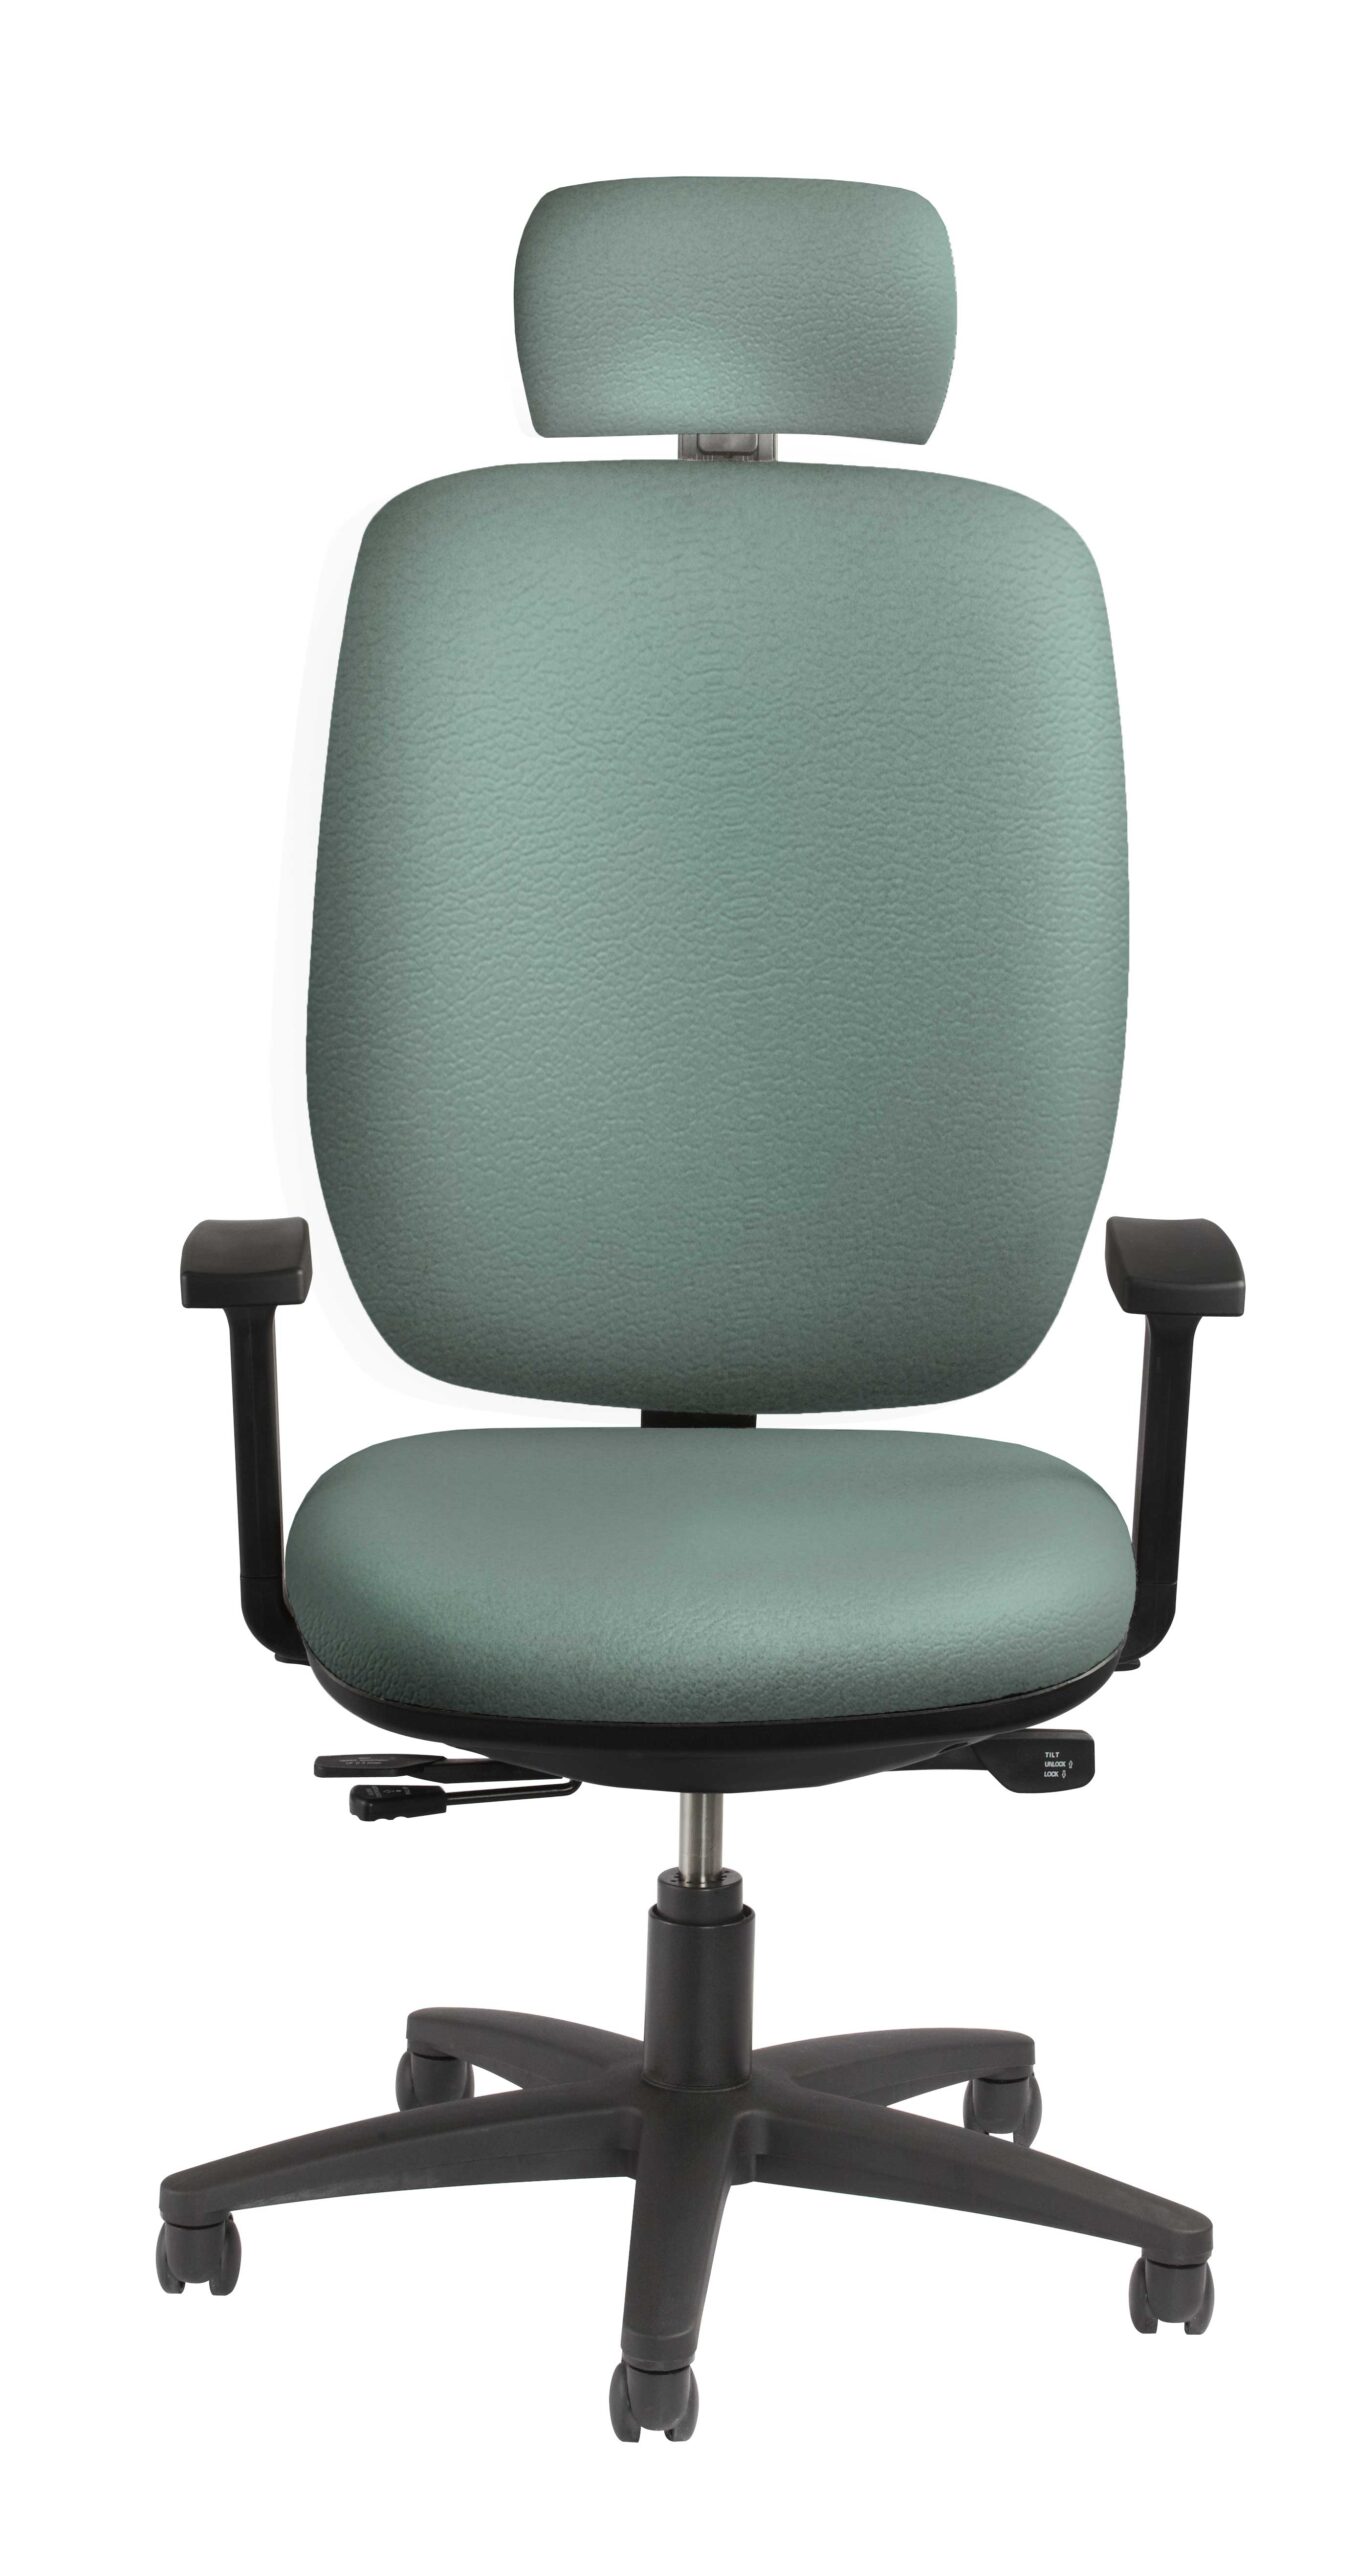 Nightingale_Frio_2300_with_headrest_Mikmaq_Office_Furniture-scaled-1.jpg